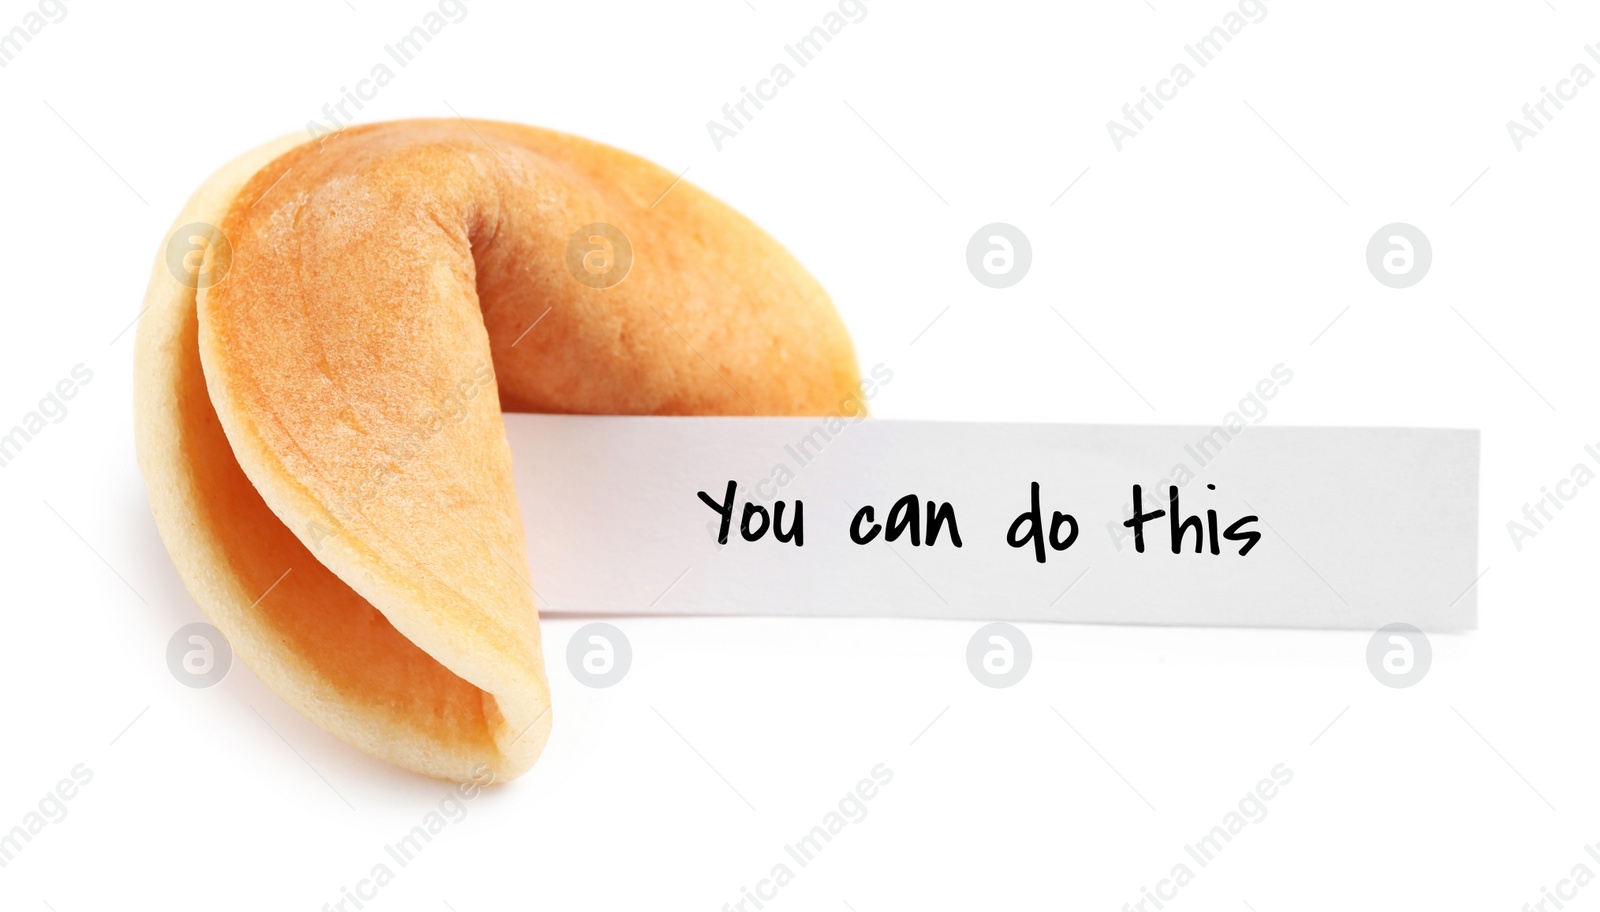 Image of Tasty fortune cookie and prediction You can do this on white background